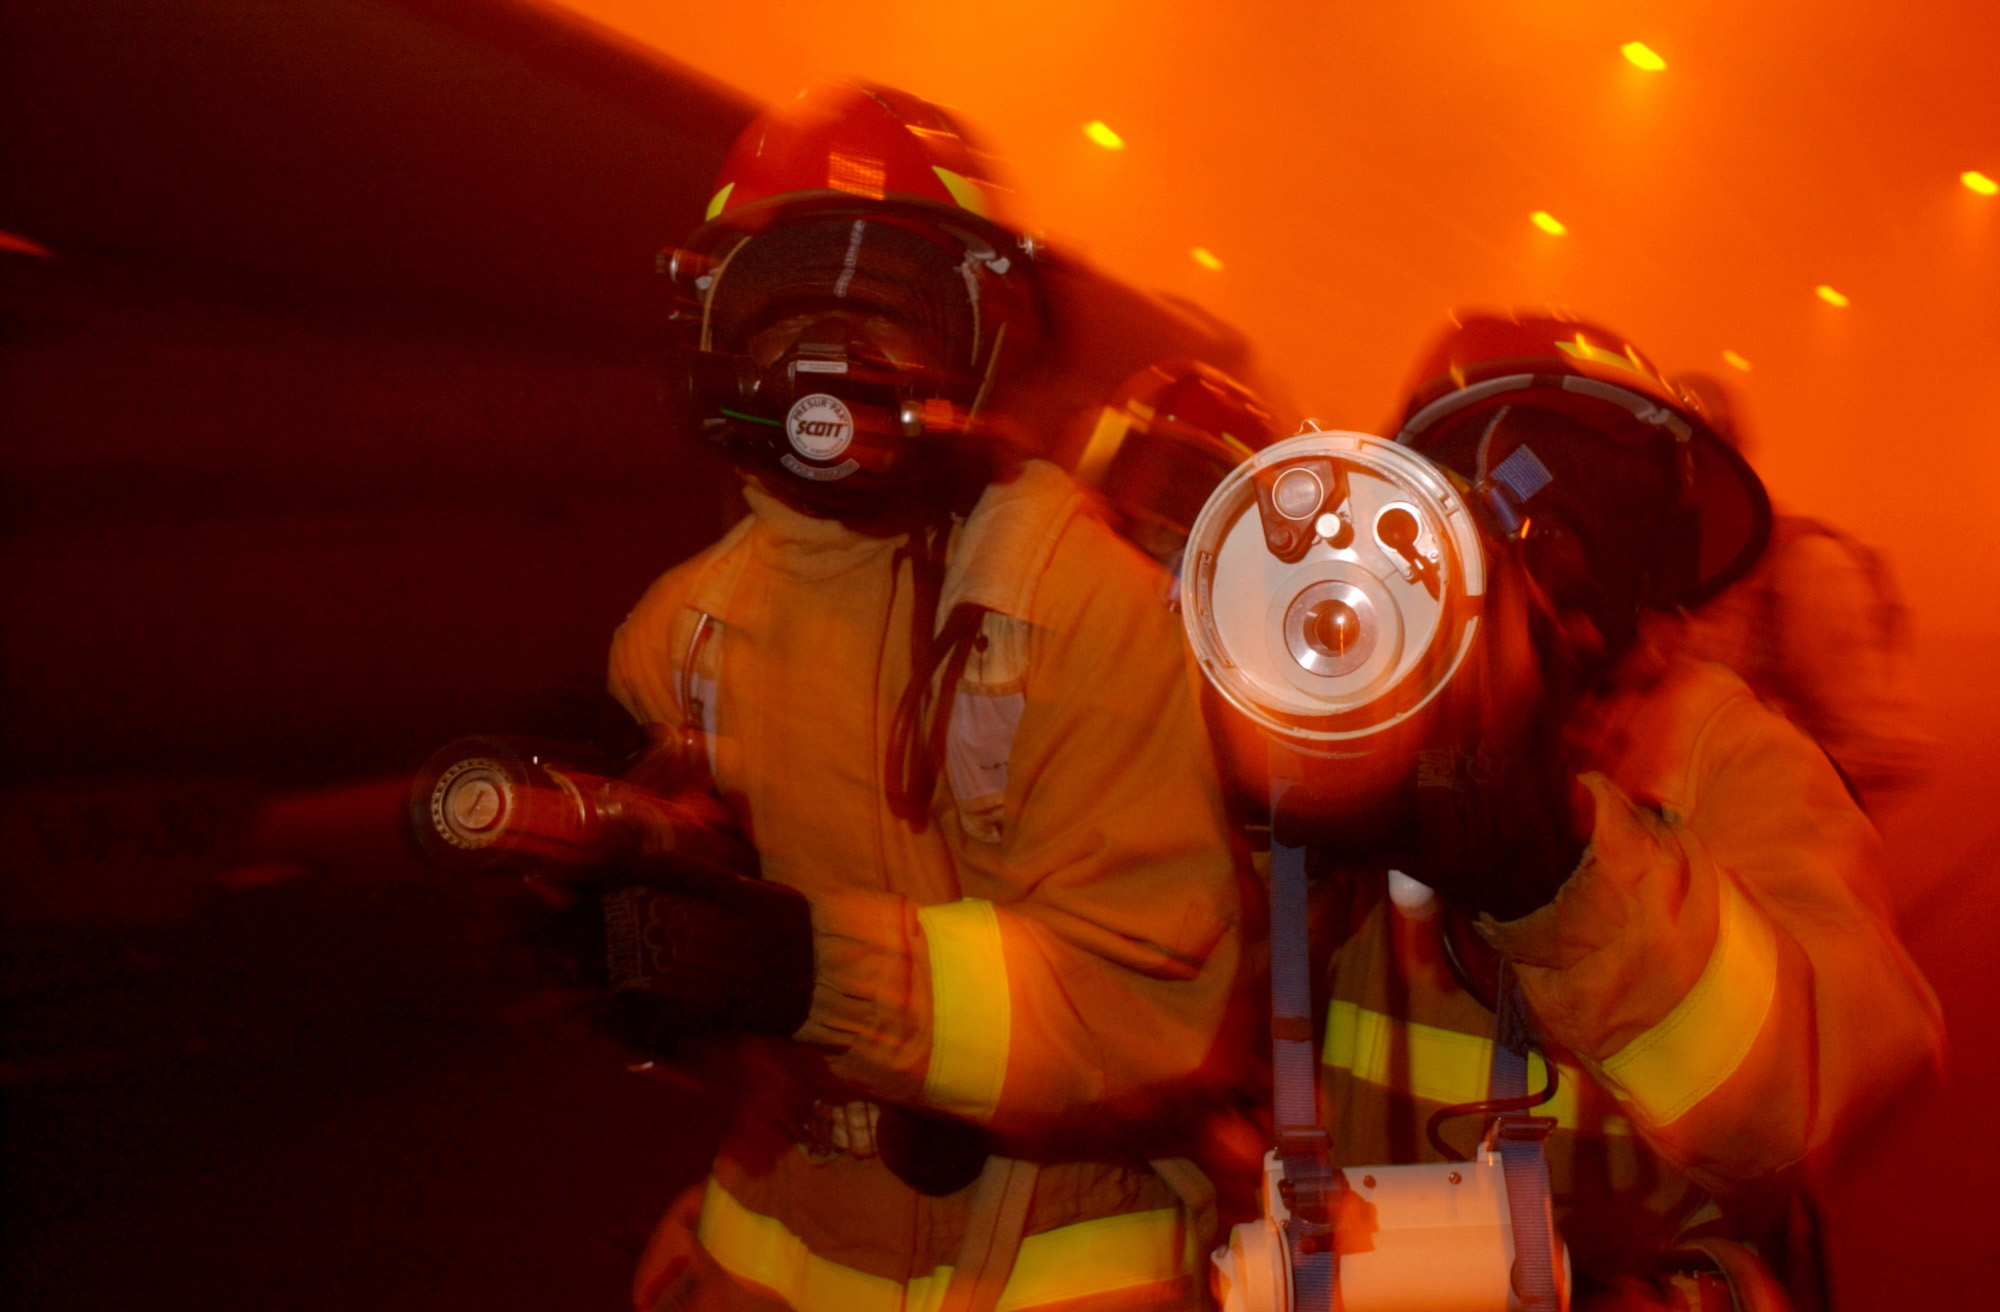 US Navy 040419-N-9851B-076 A fire team uses a Naval Firefighter Thermal Imager (NFTI) while advancing on a simulated fire